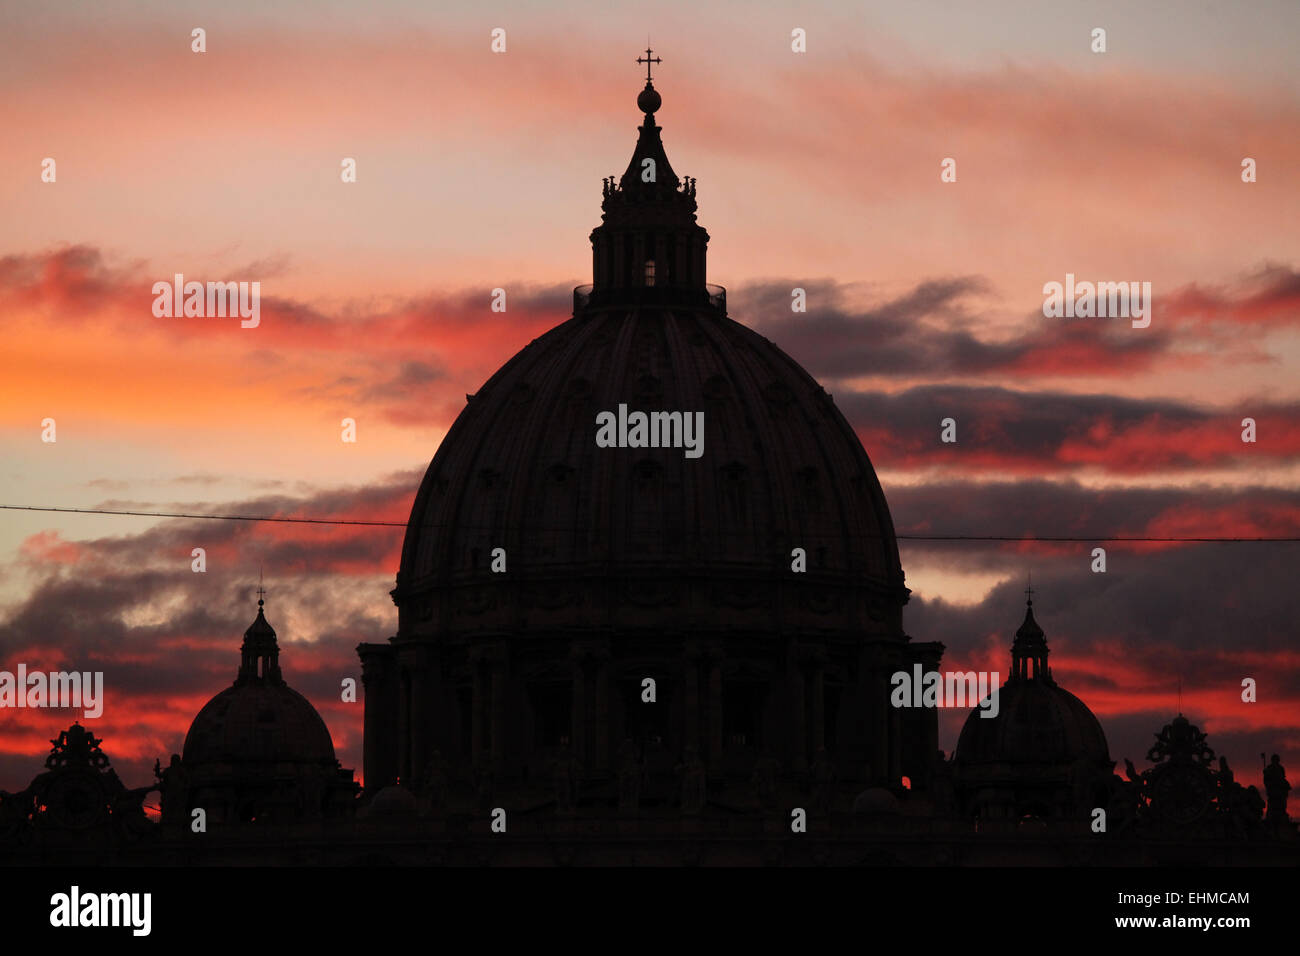 Sunset over the dome of Saint Peter's Basilica in Vatican City in Rome, Lazio, Italy. Stock Photo